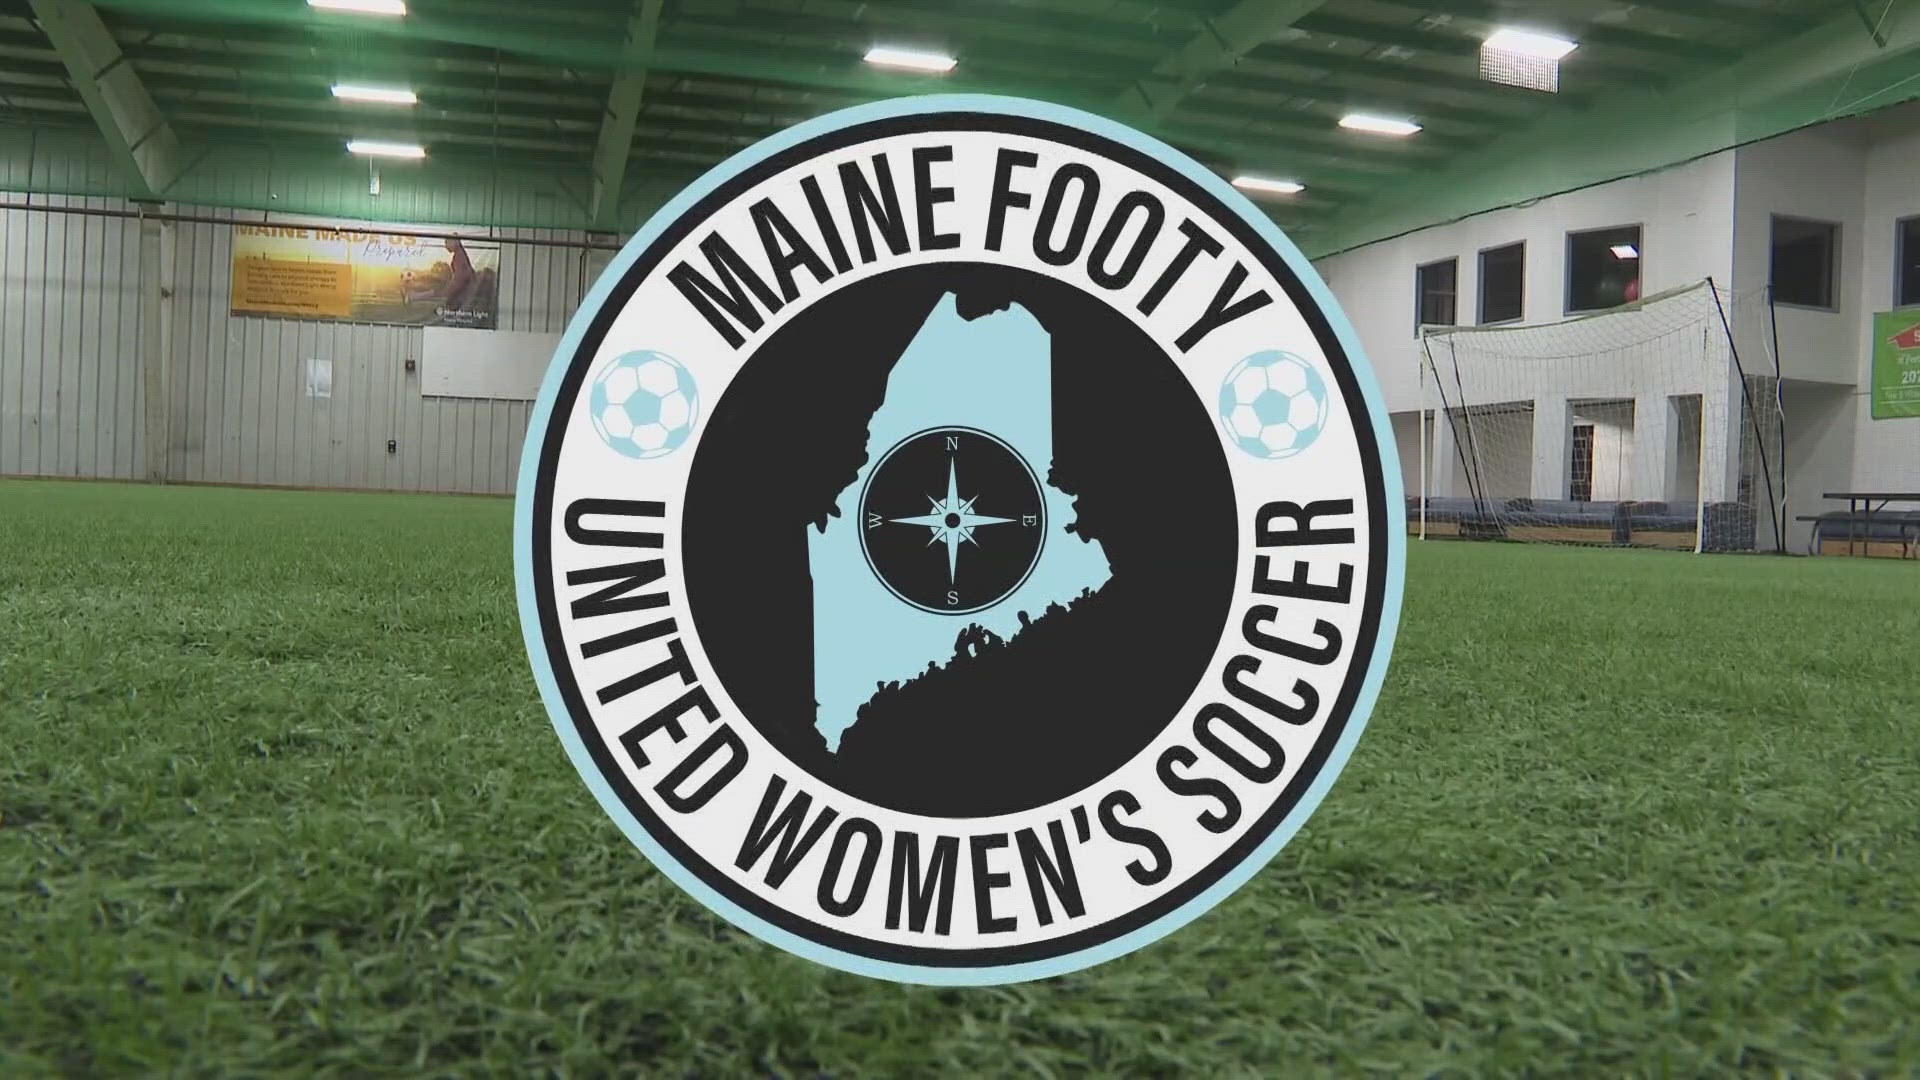 Excitement about soccer in Maine has been growing.